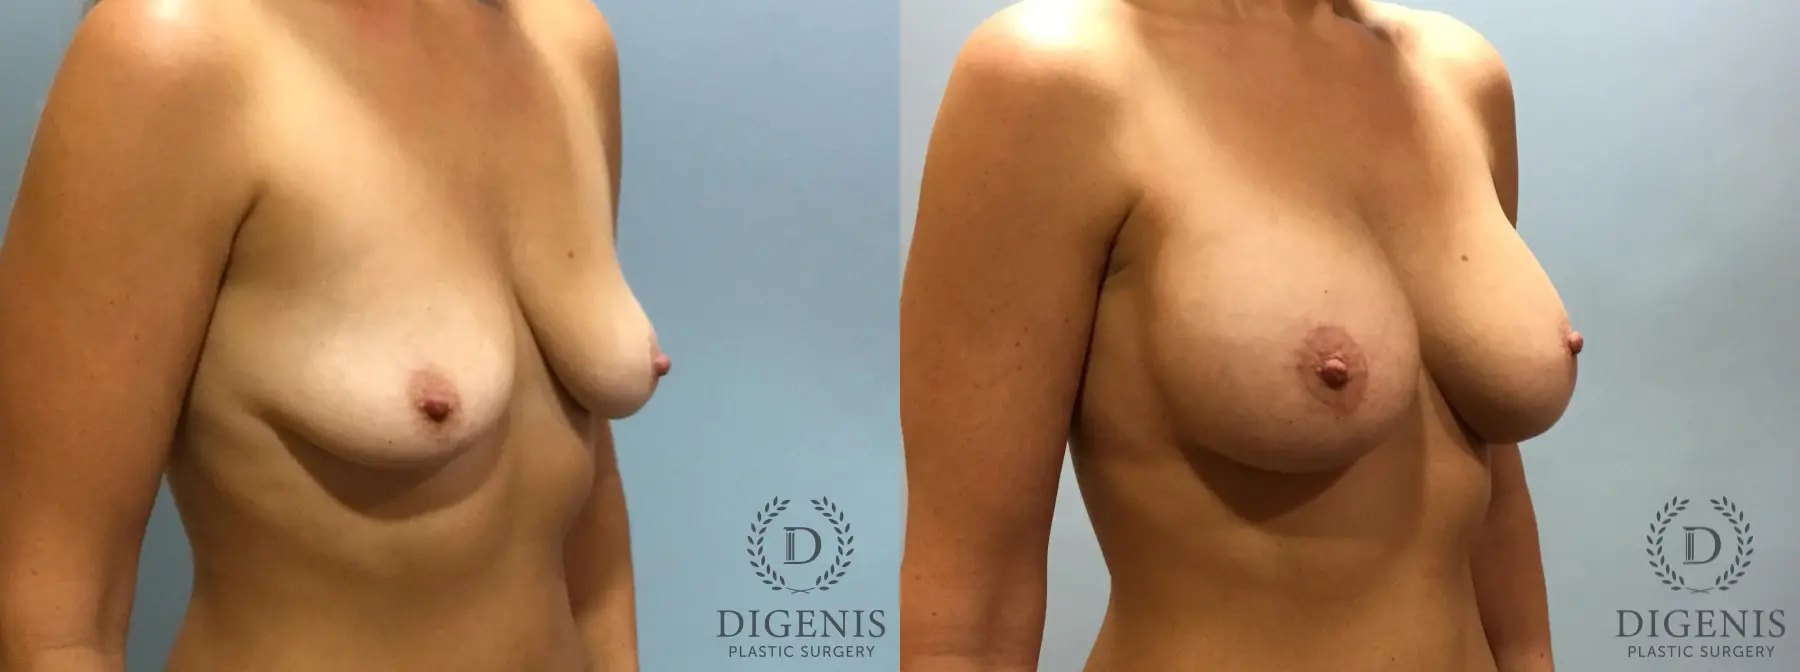 Breast Lift With Implants: Patient 5 - Before and After 2